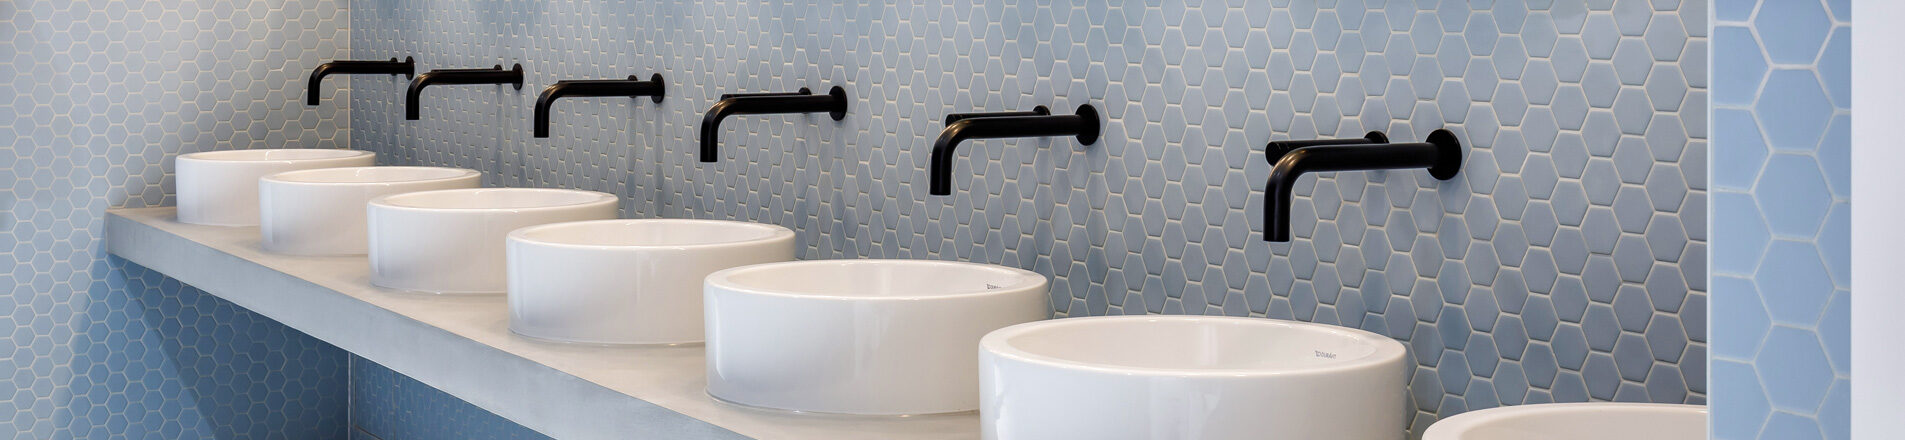 Specify tap lengths for your washbasin